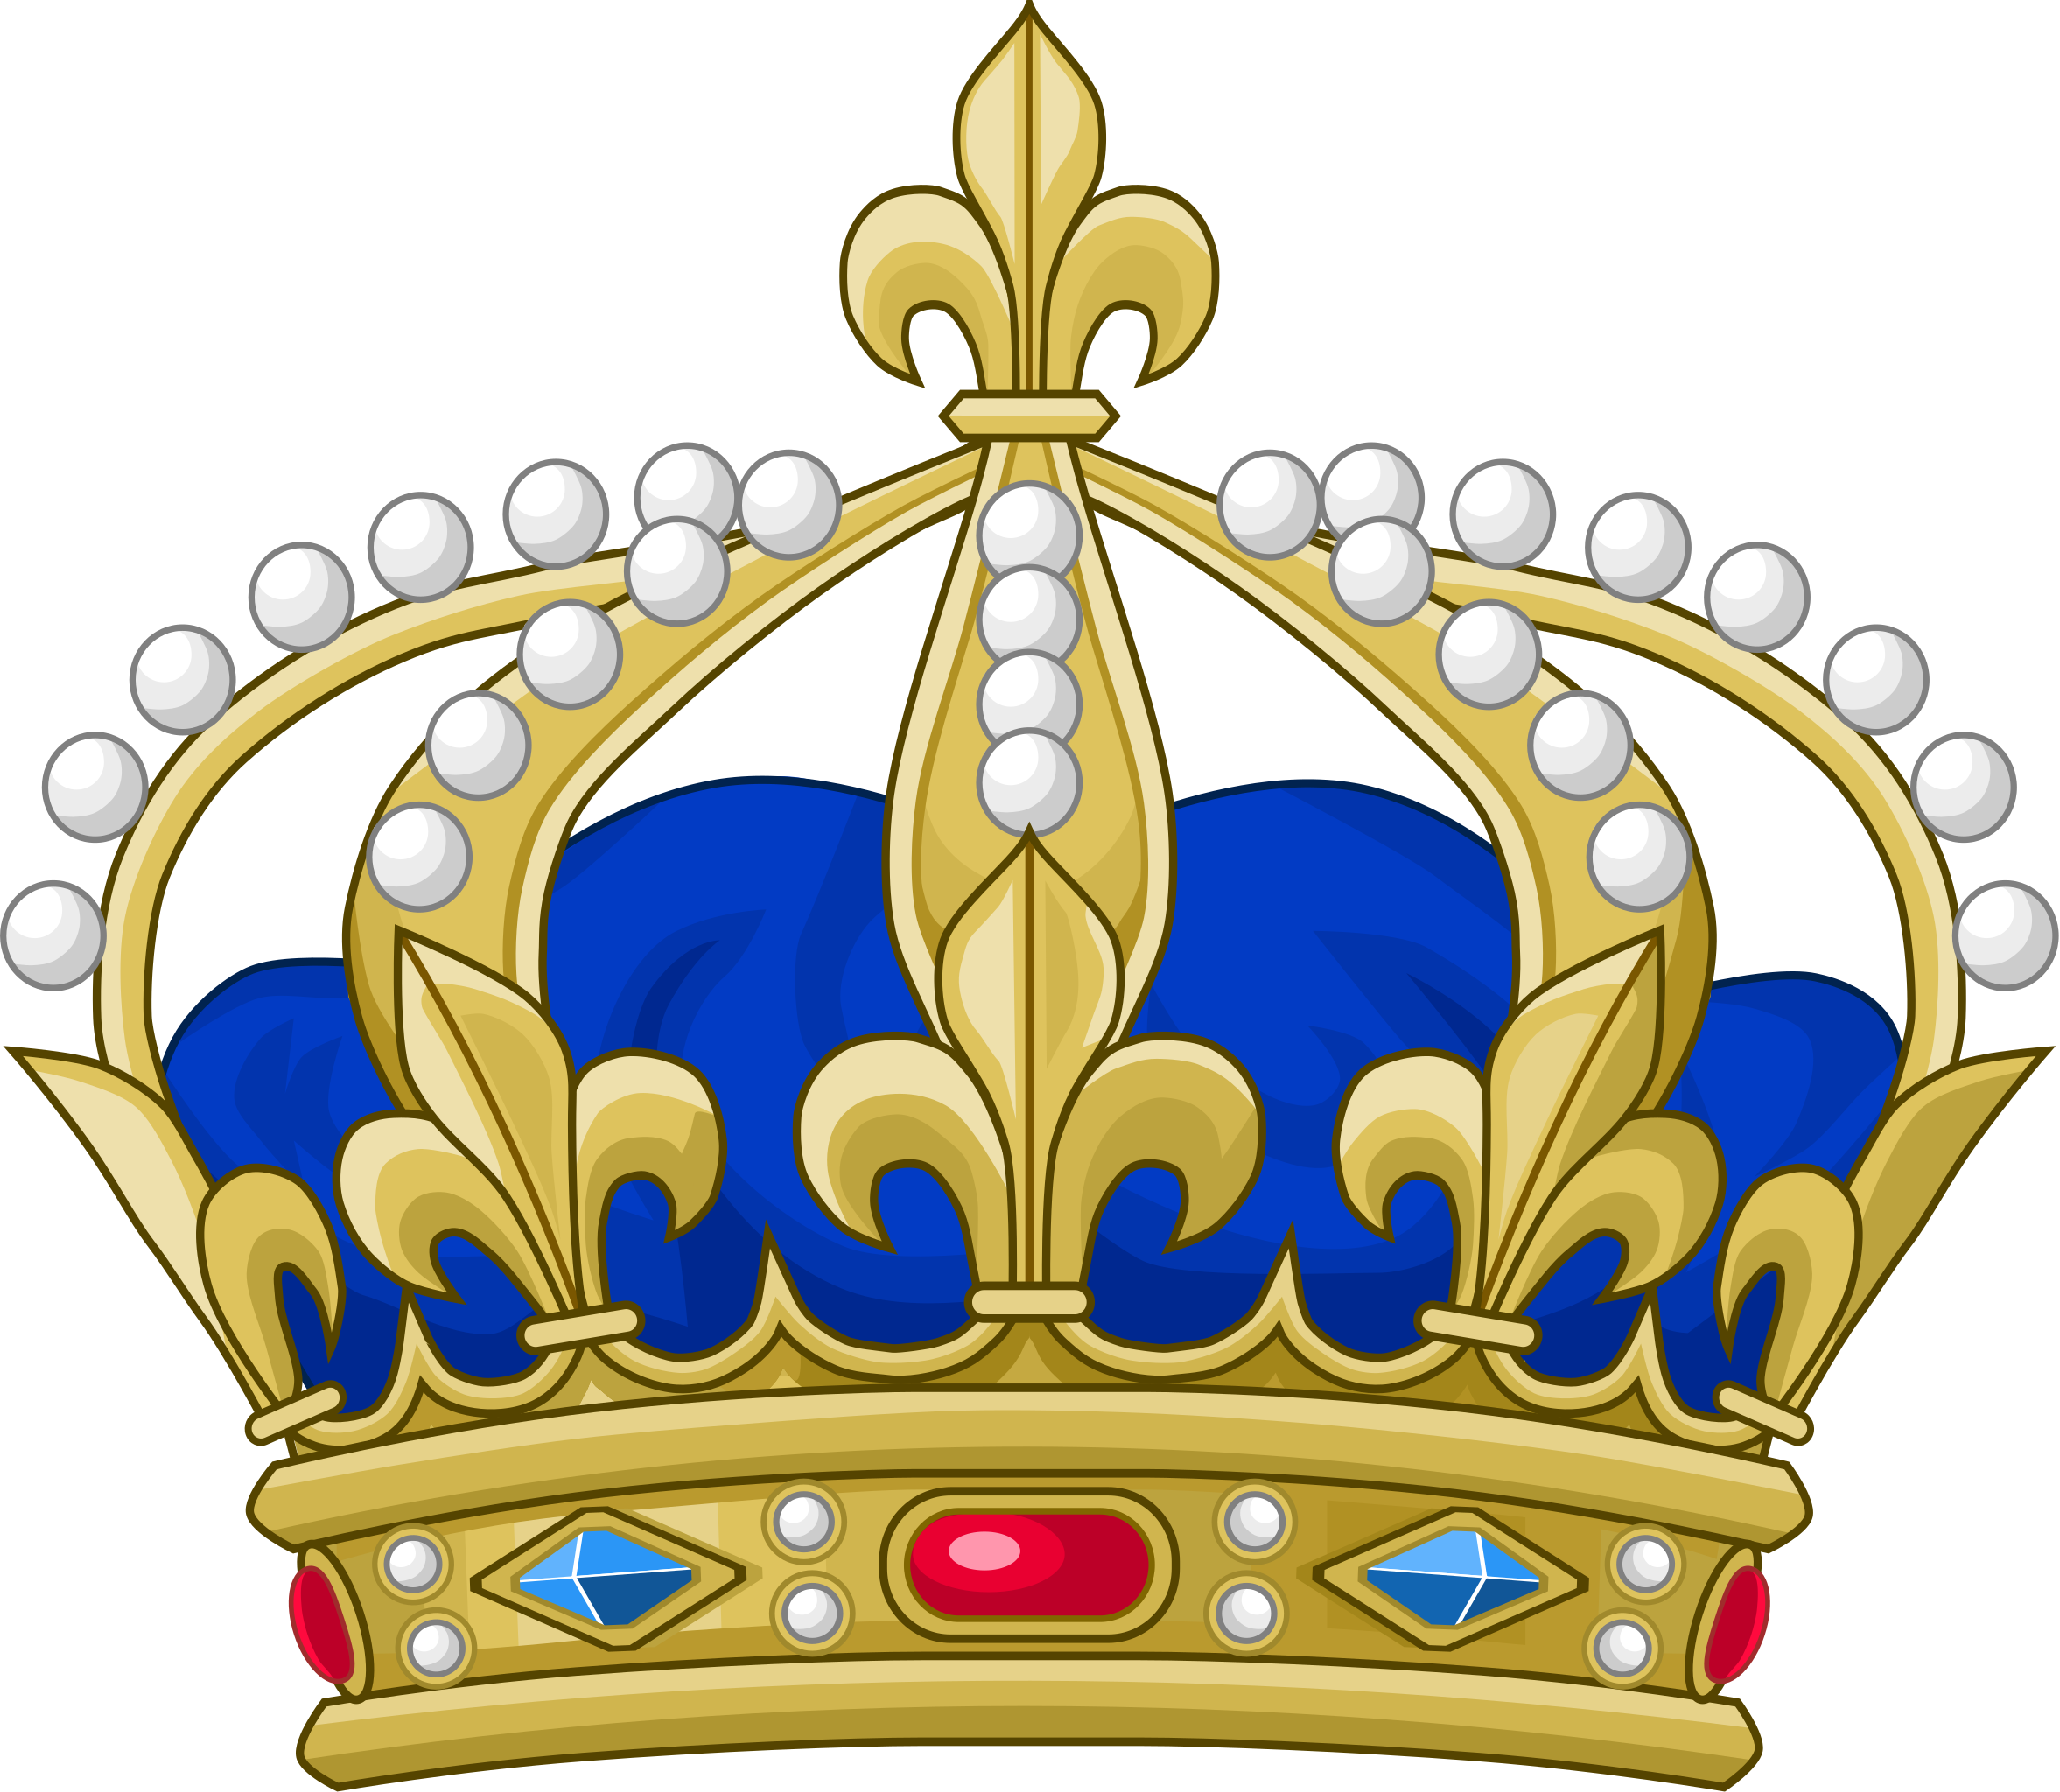 Download File Royal Crown Of France Svg Wikimedia Commons